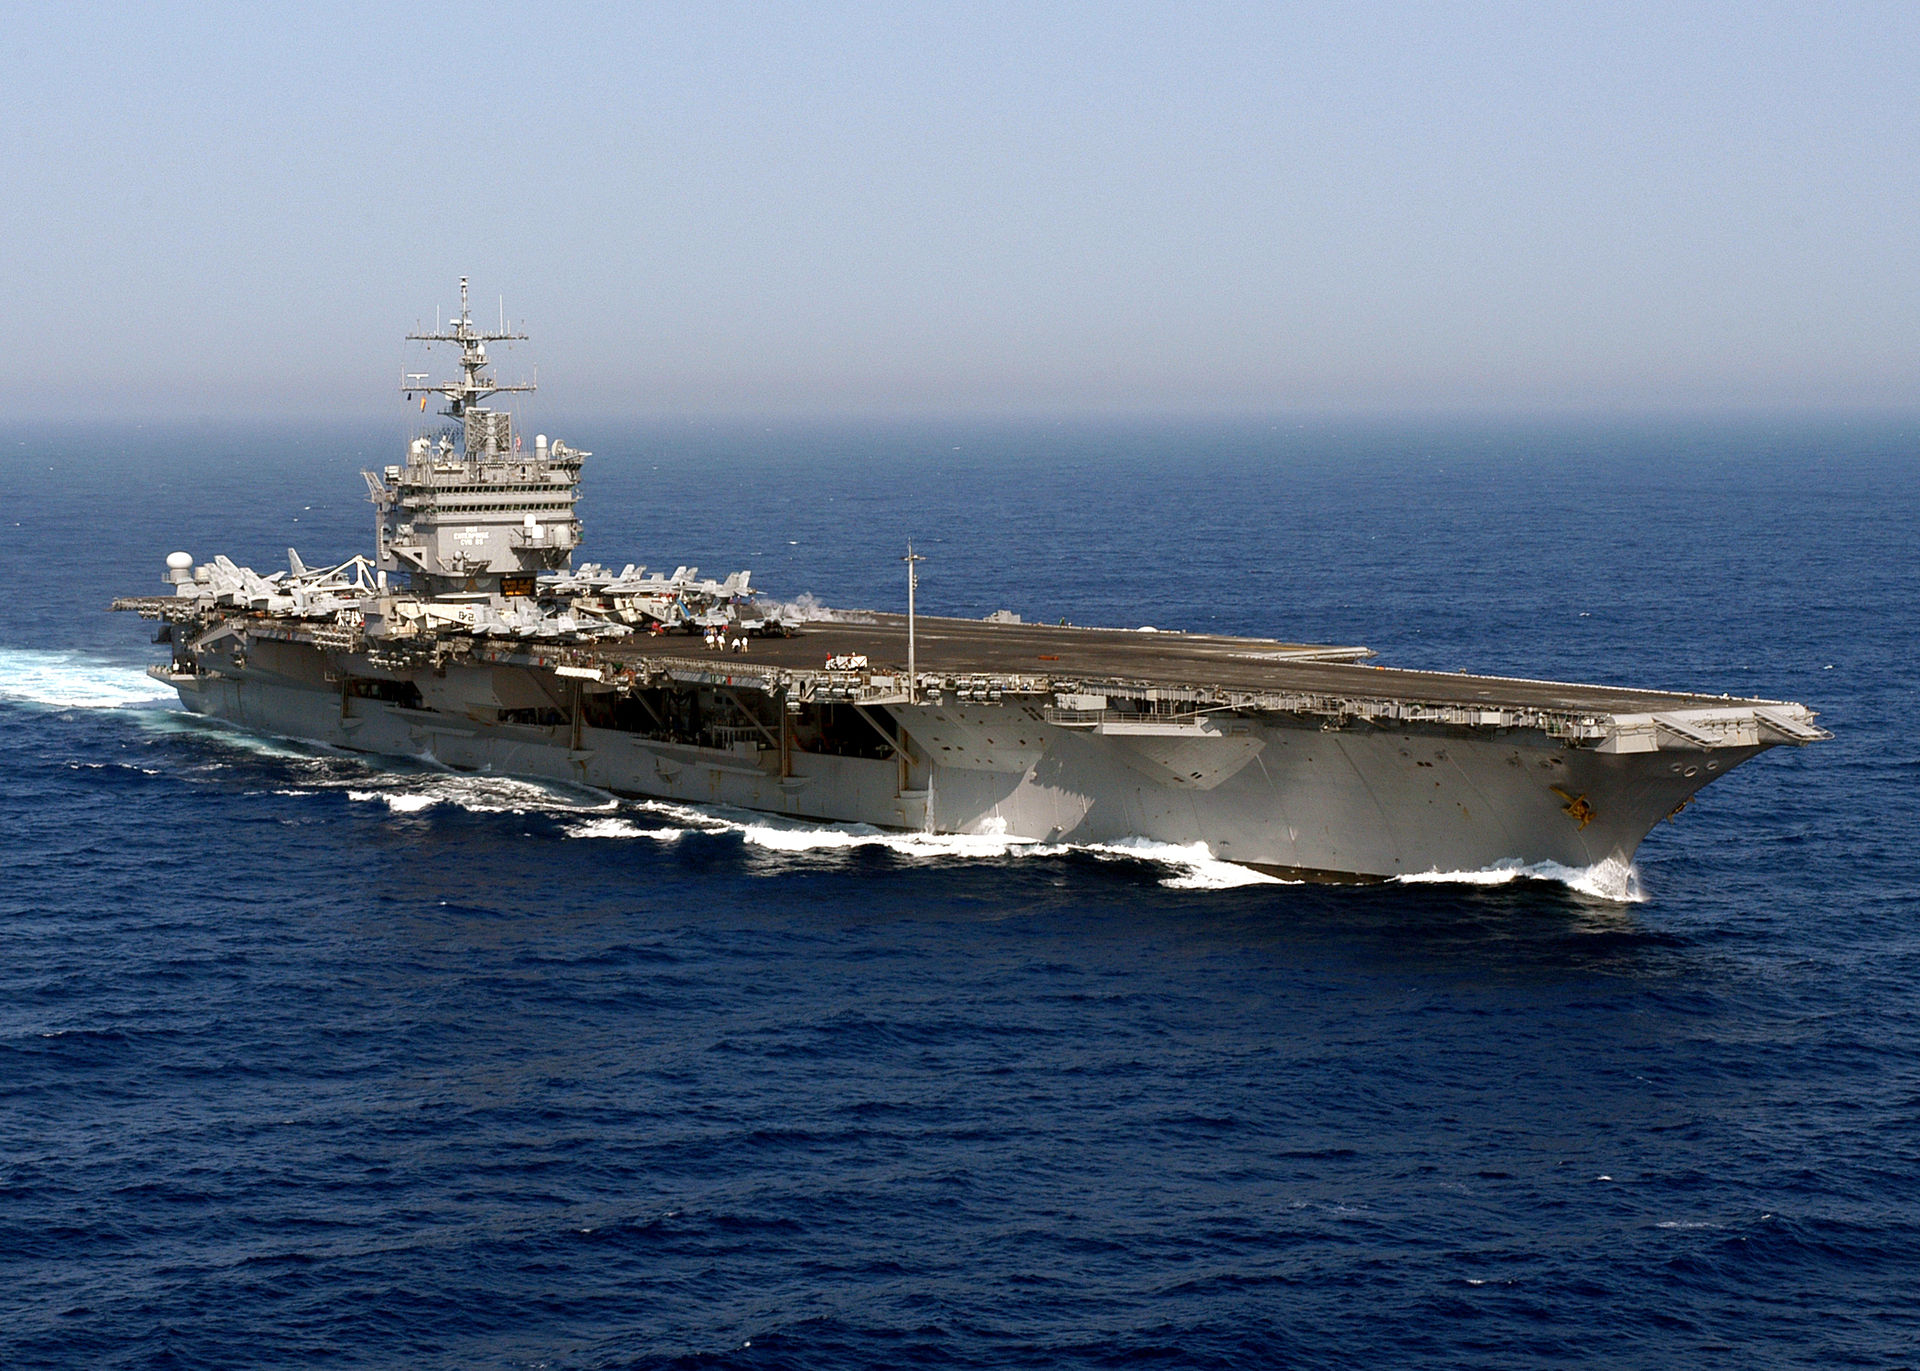 September 24, 1960 – The USS Enterprise, the First Nuclear-Powered Aircraft Carrier and the Longest Naval Vessel in the World, Is Launched. Beginning with the Construction of Enterprise, Every U.S. Navy Aircraft Carrier Has Been Nuclear-Powered and Built at Newport News Shipbuilding.